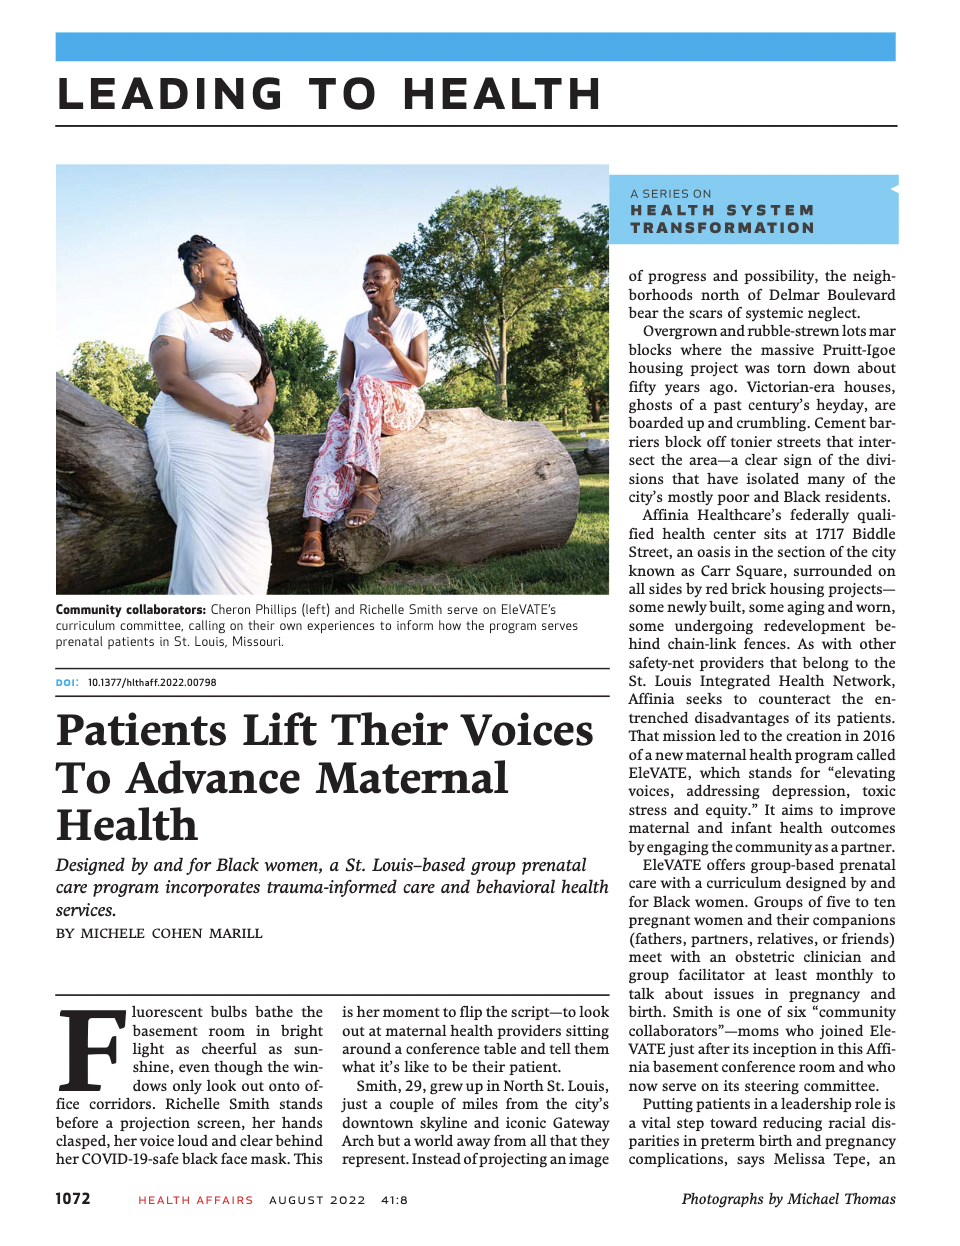 Patients Lift Their Voices To Advance Maternal Health